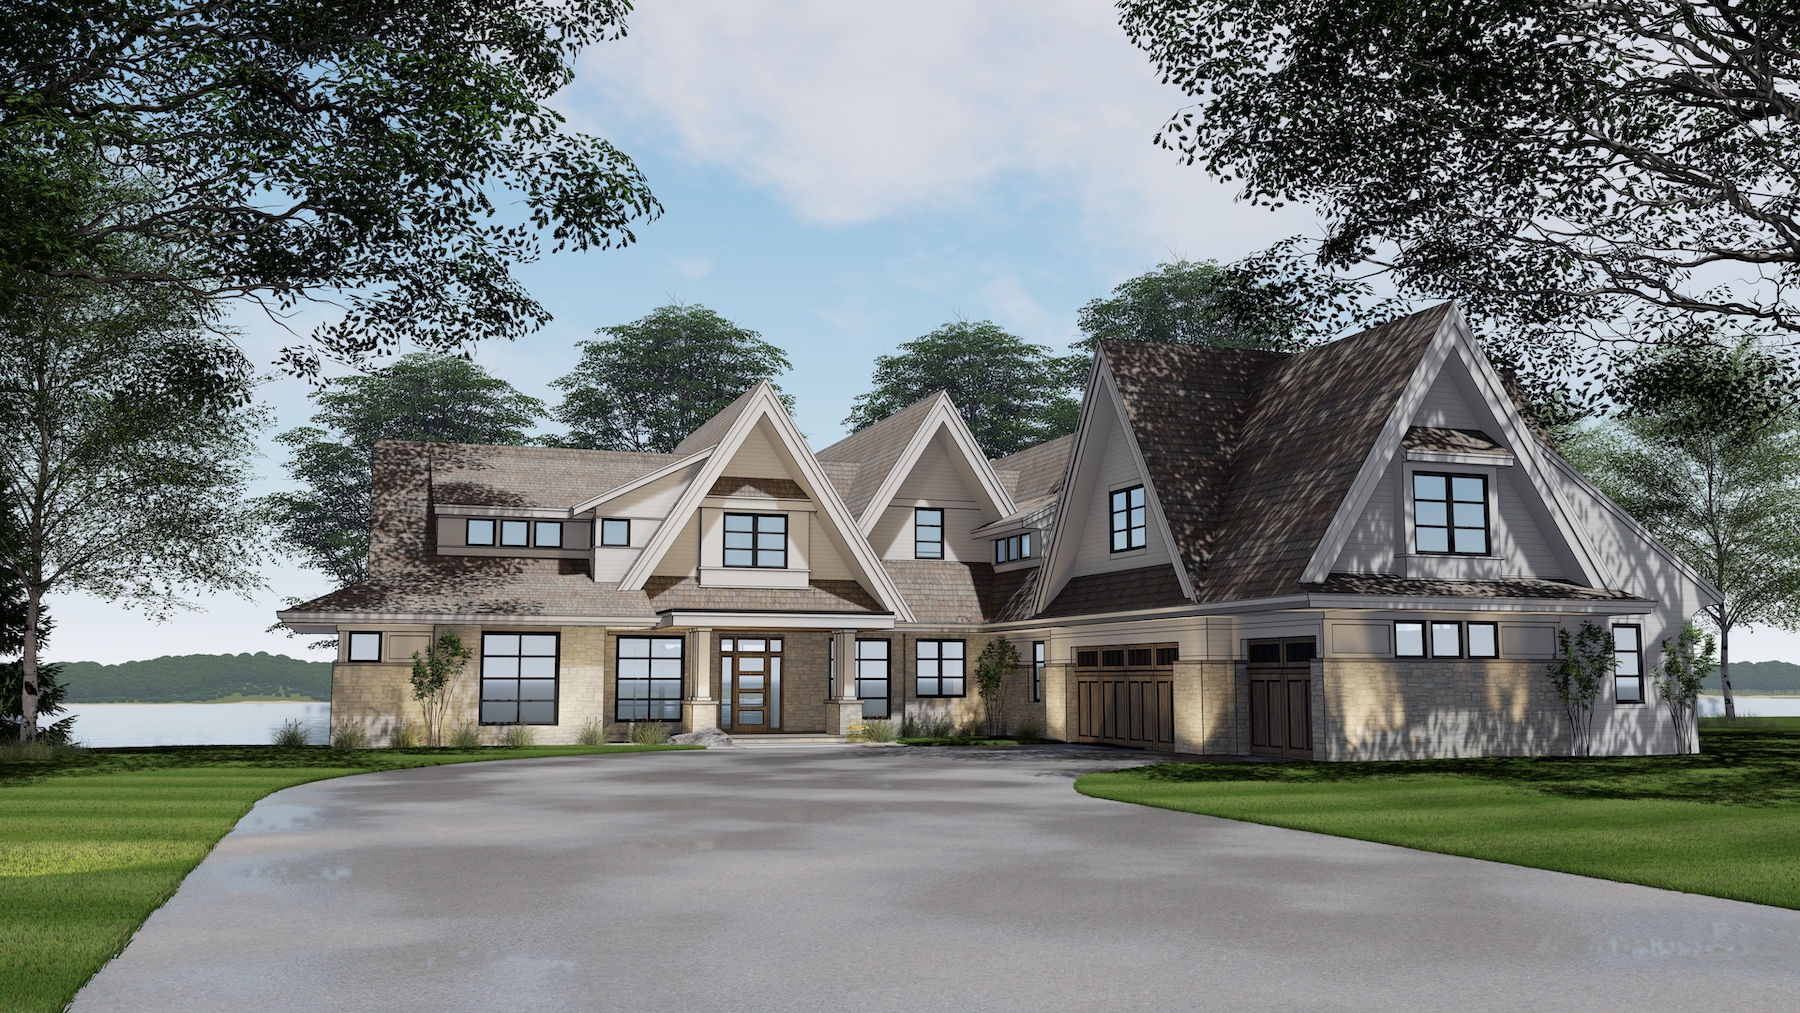 This is a rendering of the front of these country house plans.